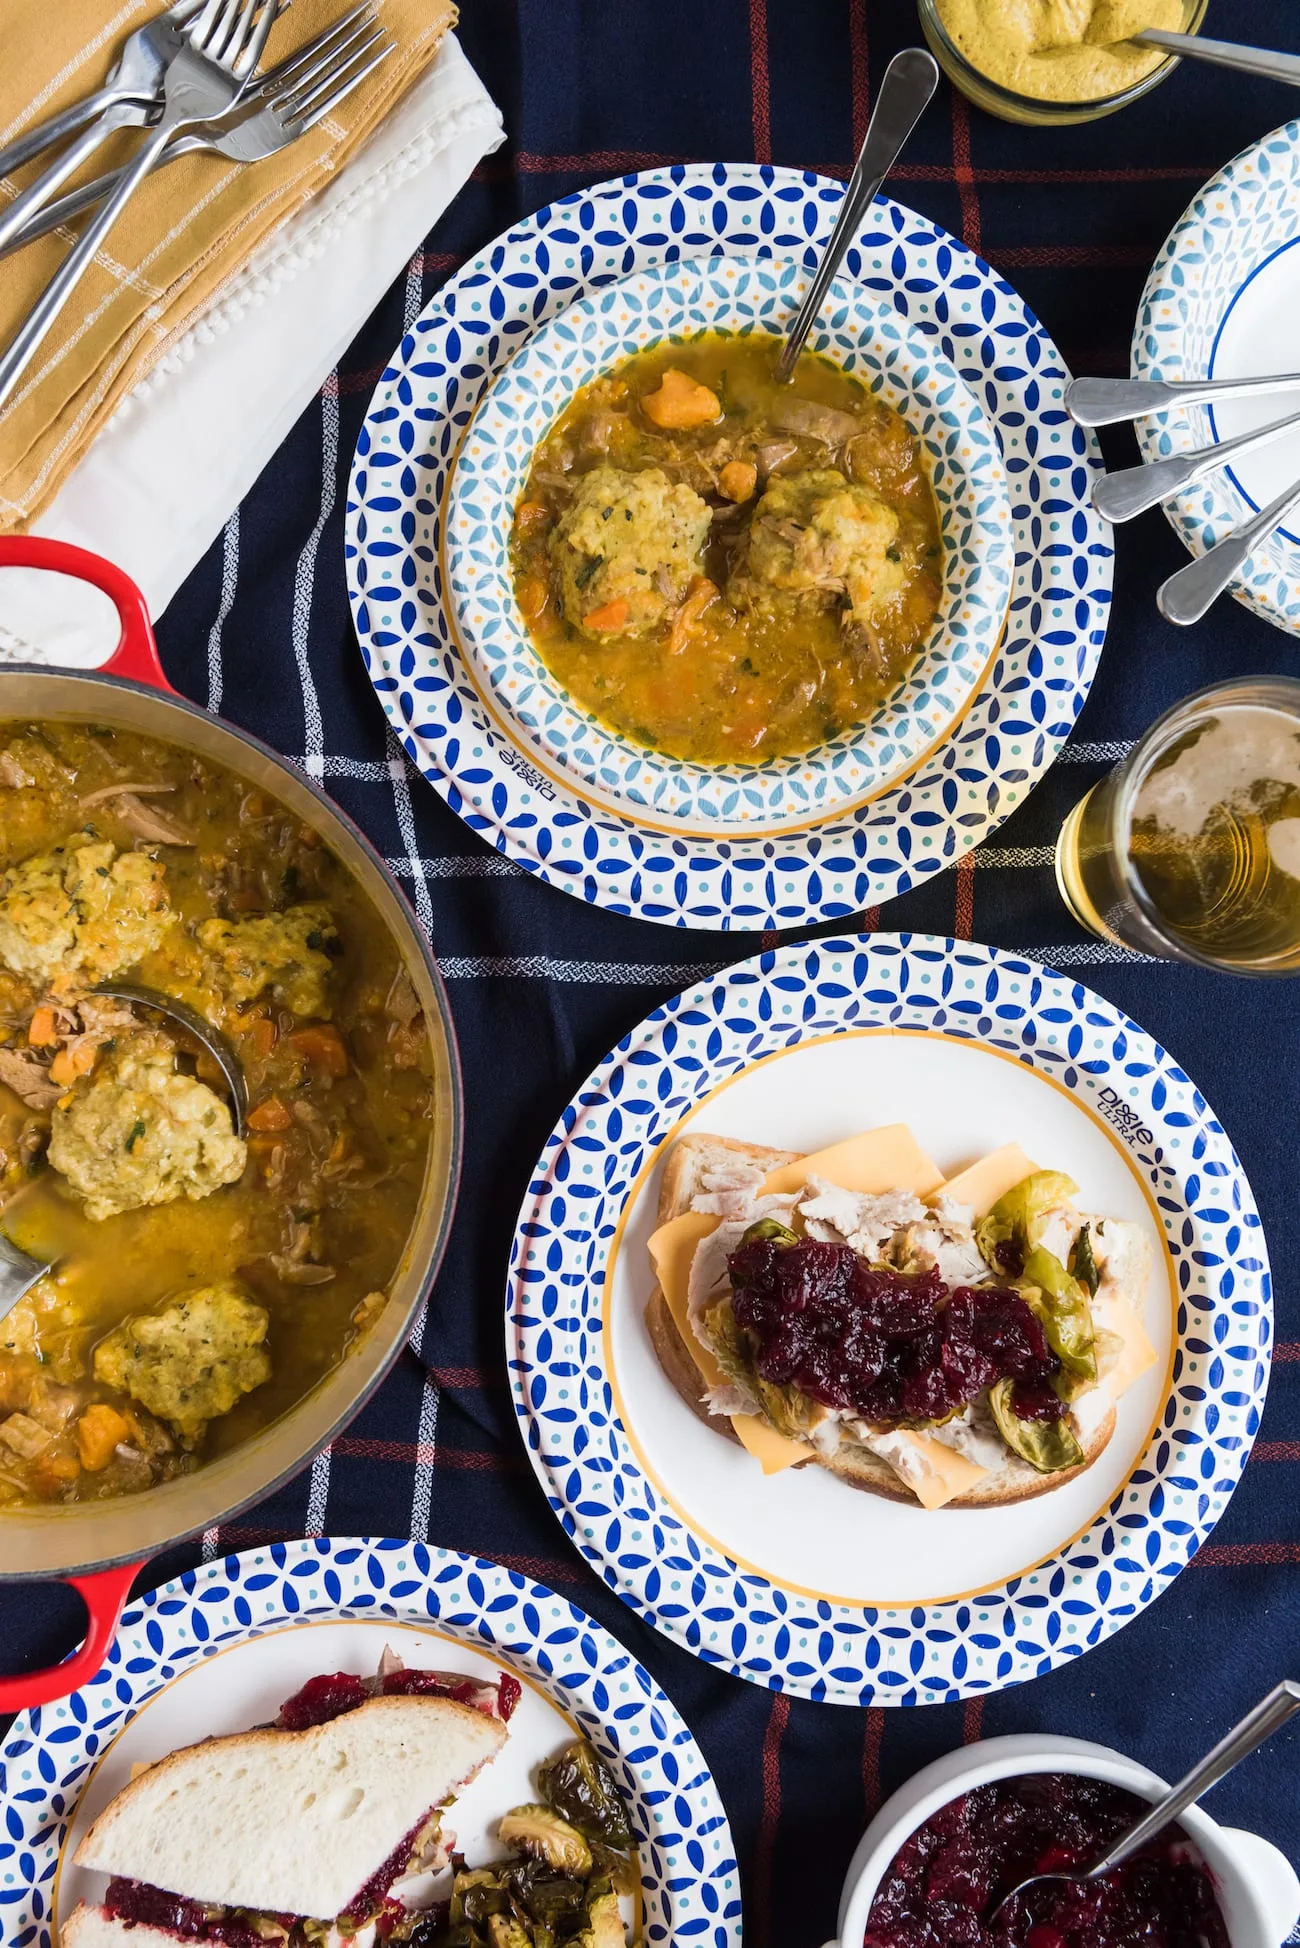 Hosting Friendsgiving with the Best Thanksgiving Leftovers Recipes like leftover stuffing dumplings from entertaining blog @cydconverse